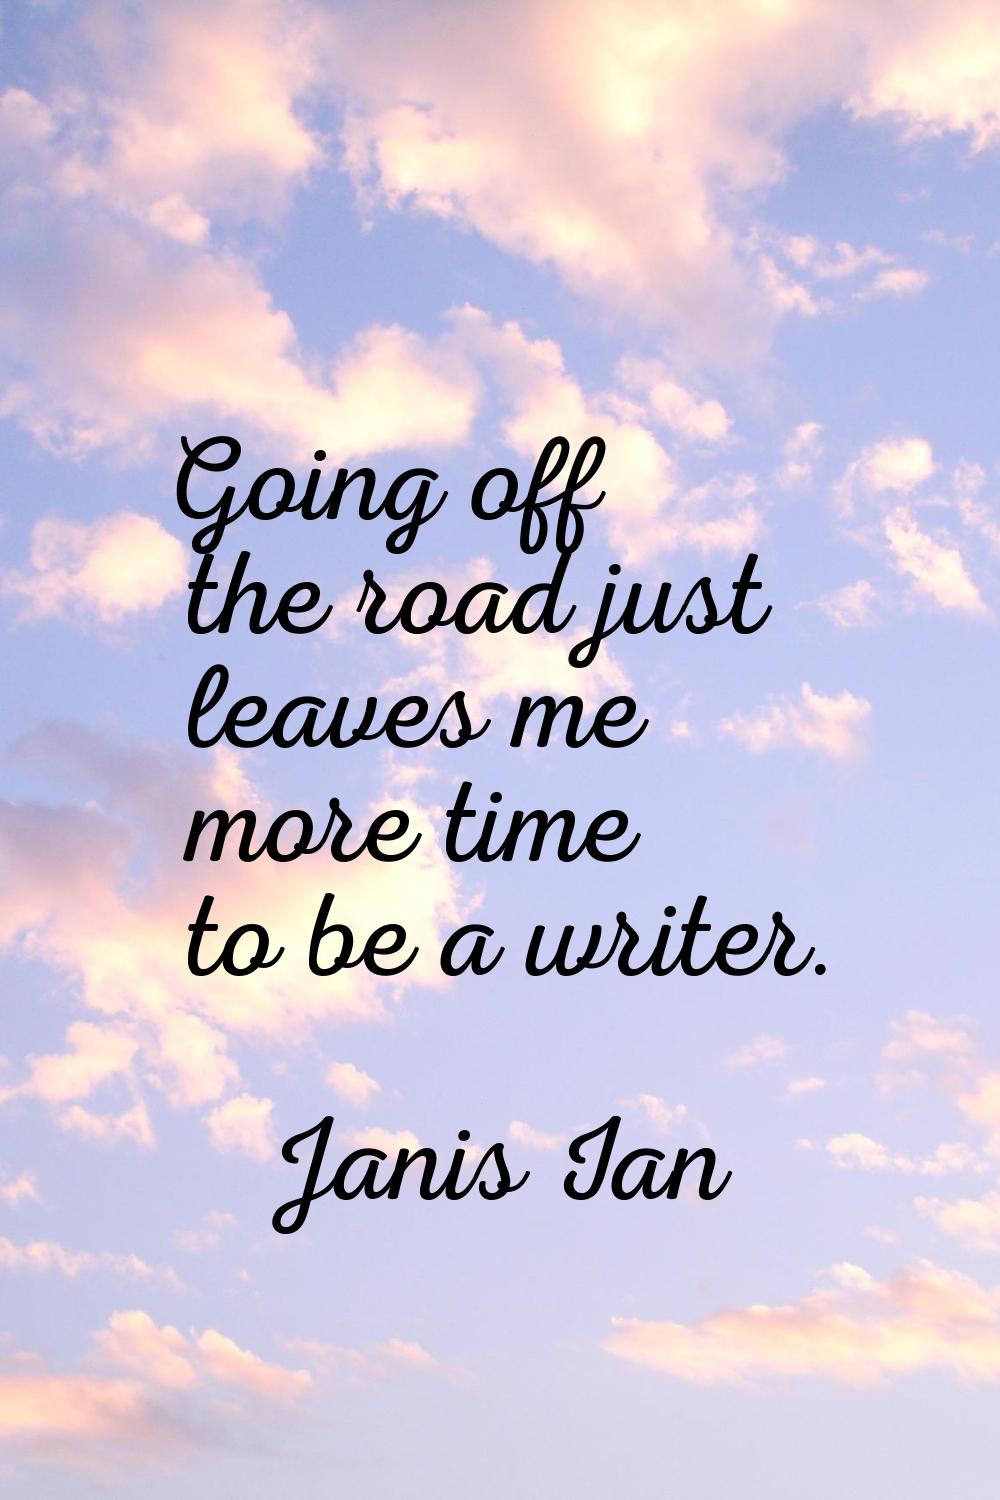 Going off the road just leaves me more time to be a writer.